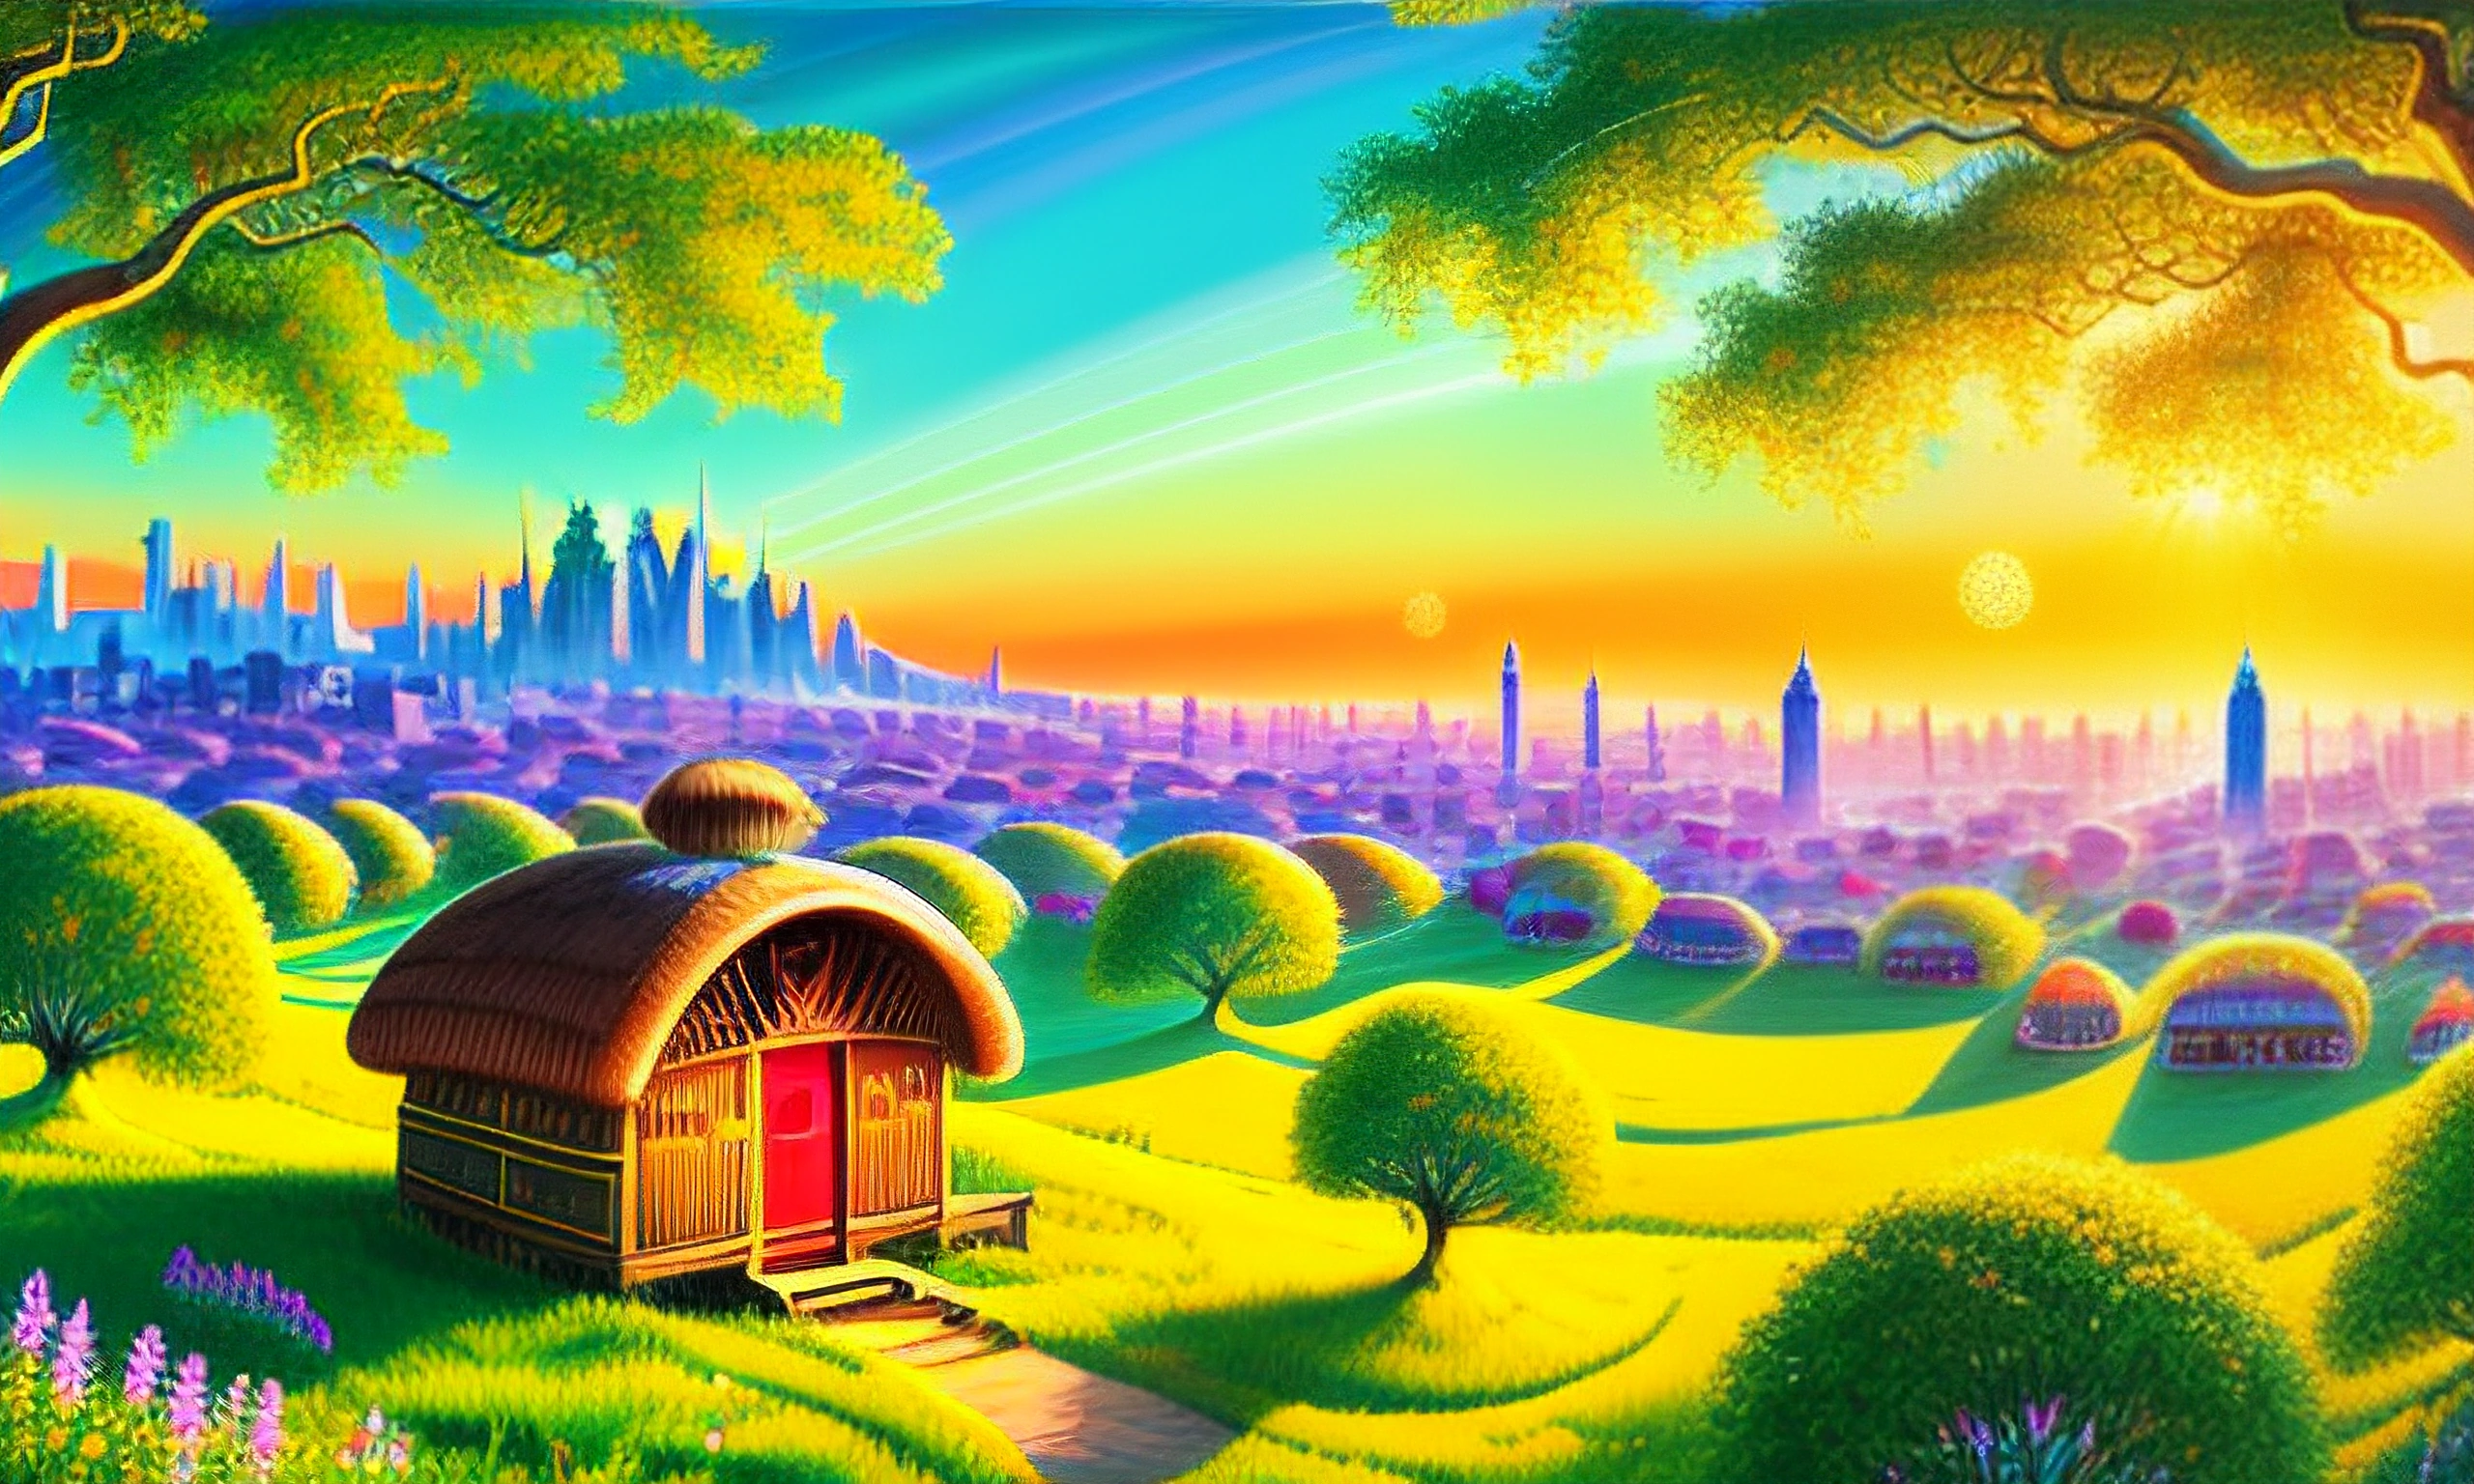 a painting of a small hut in a green field with a city in the background